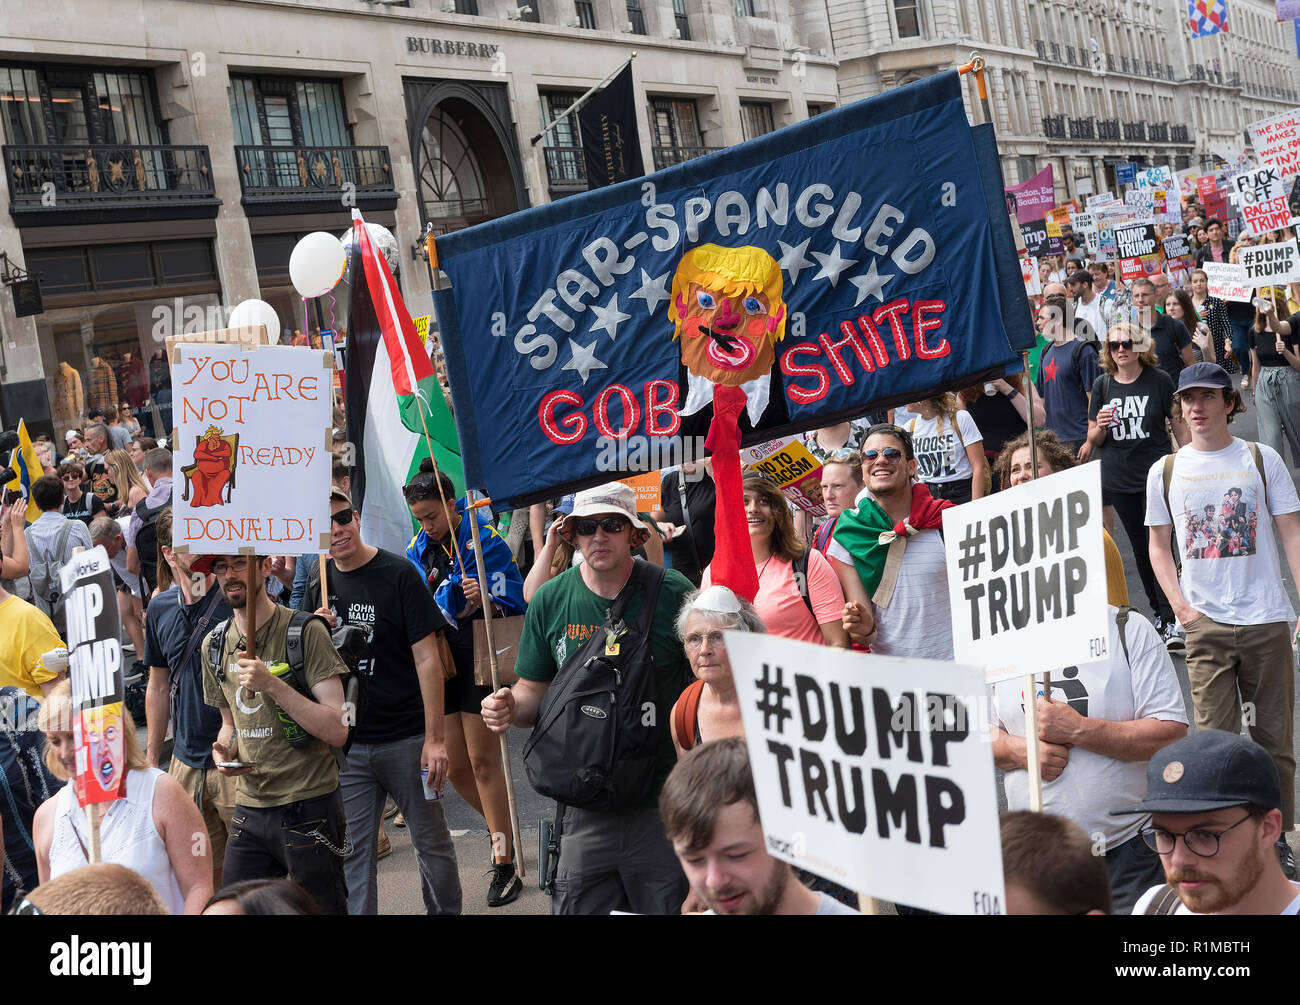 100 000 people demonstrated against the visit of Donal Trump to the UK, London 13 July 2018 Stock Photo